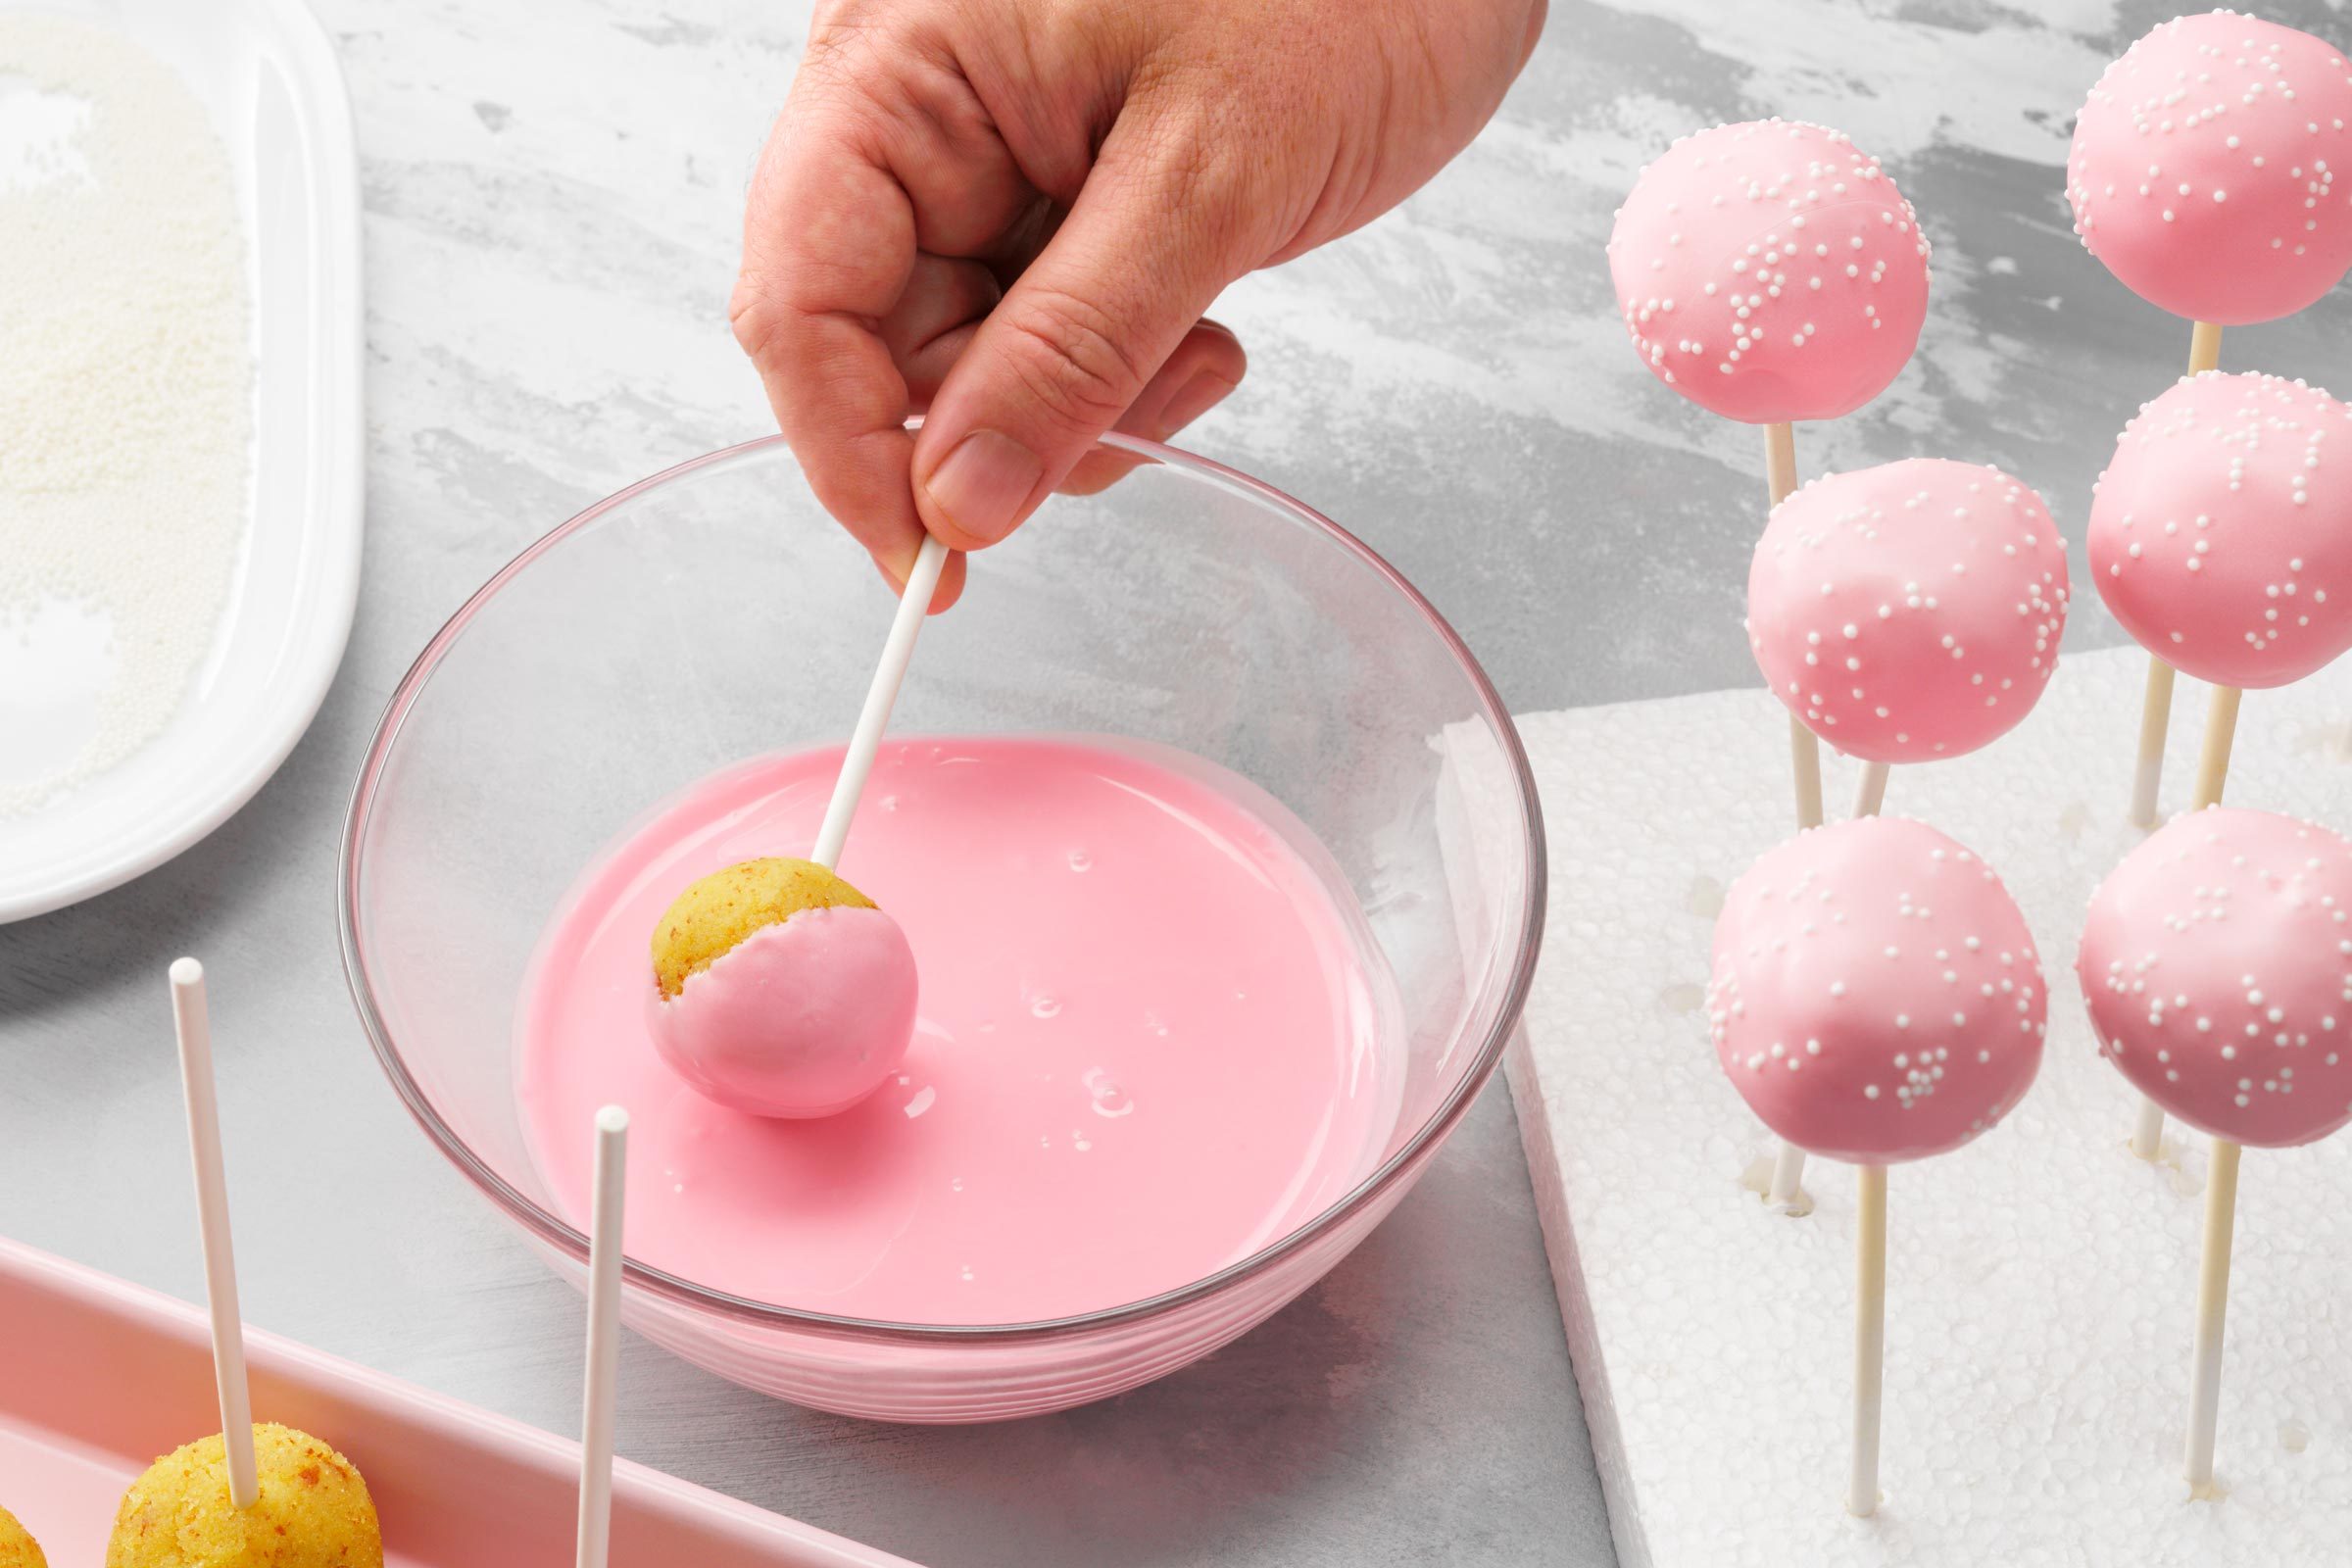 dipping cake pops into pink frosting